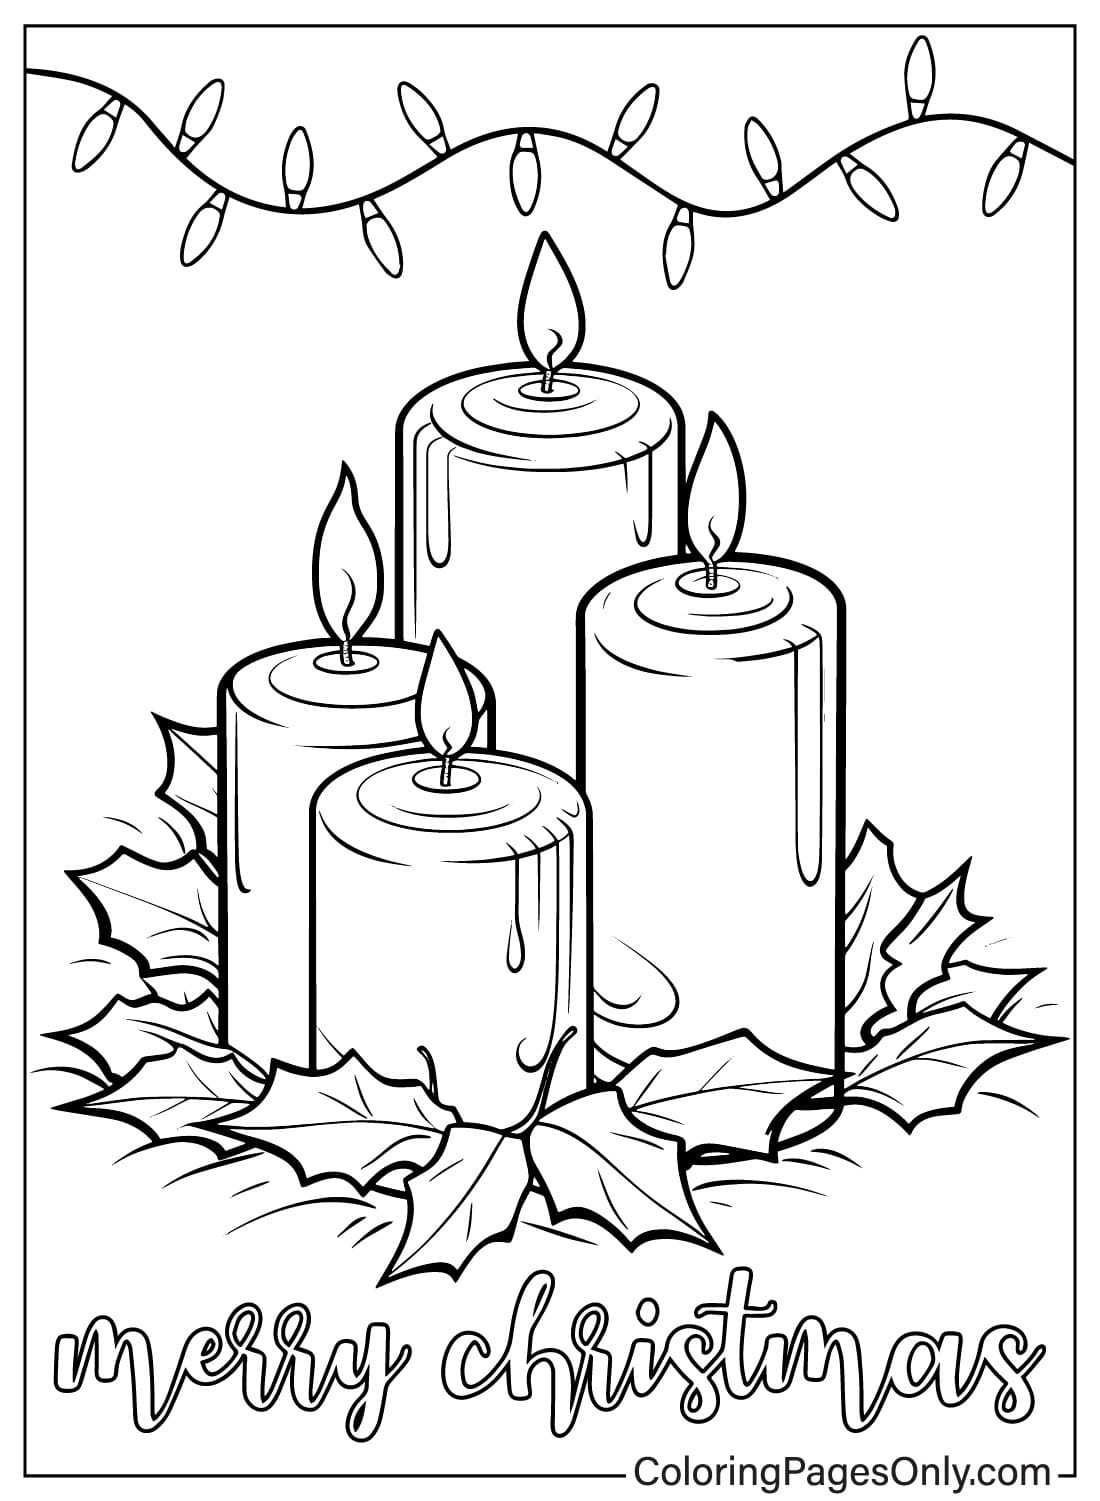 Drawing Christmas Candles Coloring Page - Free Printable Coloring Pages